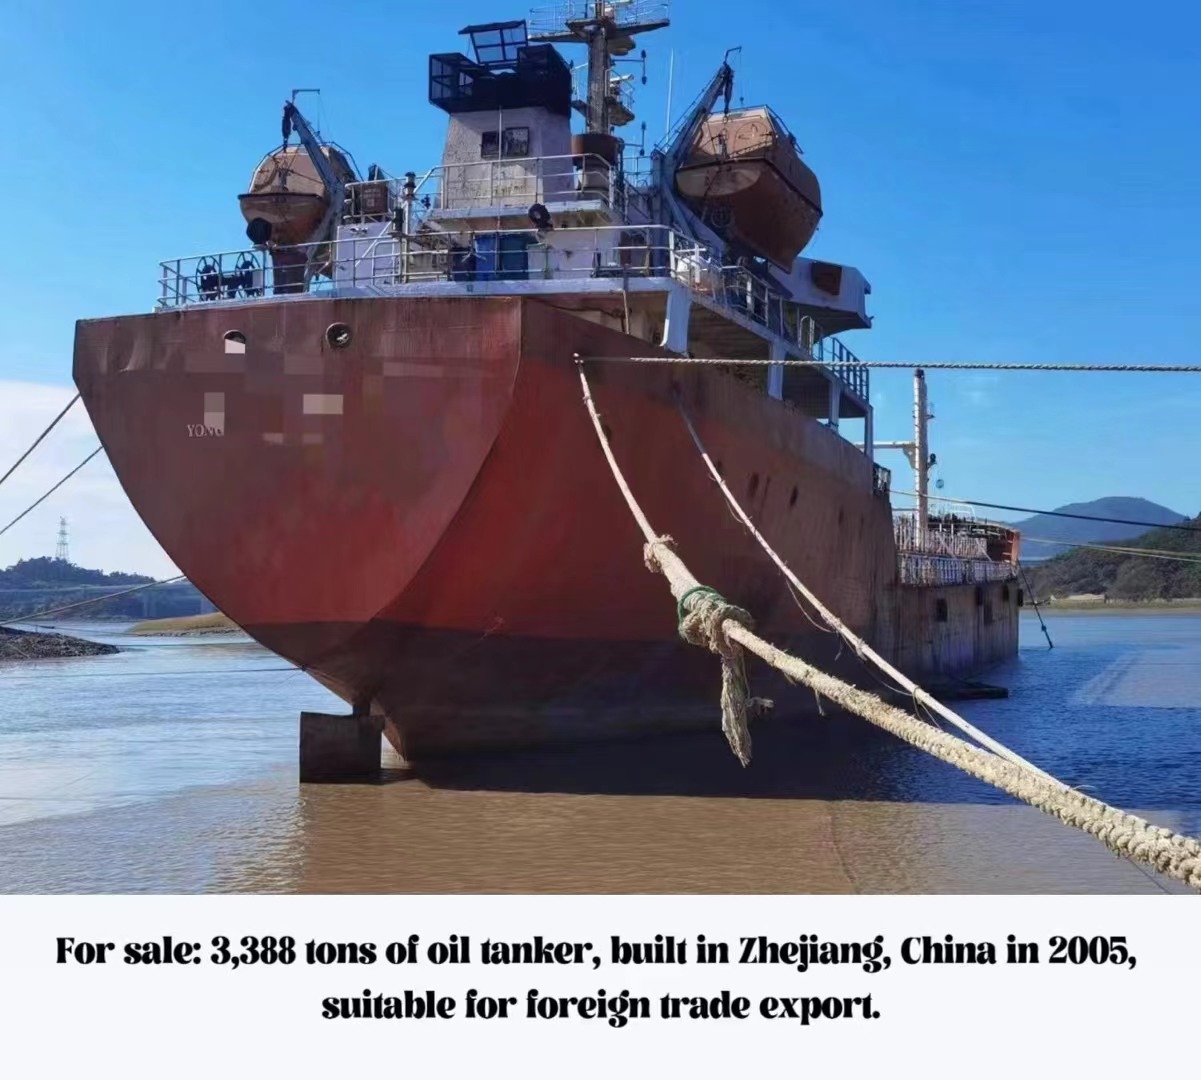 For sale: 3,388 tons of oil tanker, built in Zhejiang, China in 2005, suitable for foreign trade export.